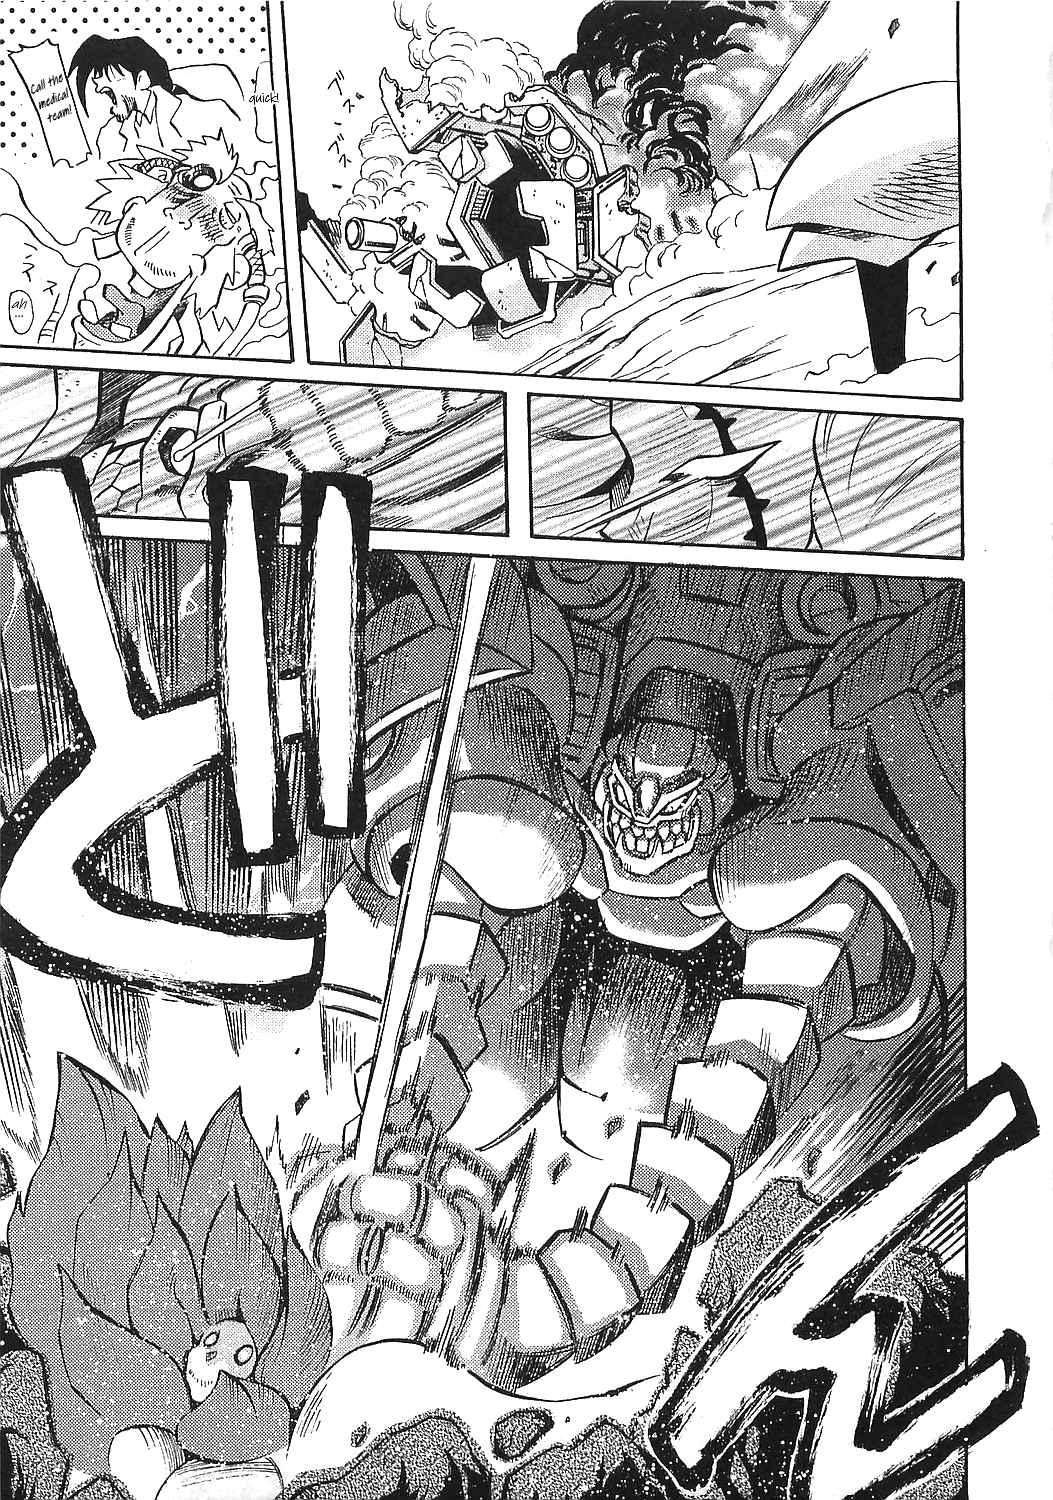 Getter Robo Hien ~THE EARTH SUICIDE~ Vol. 3 Ch. 13 A New World